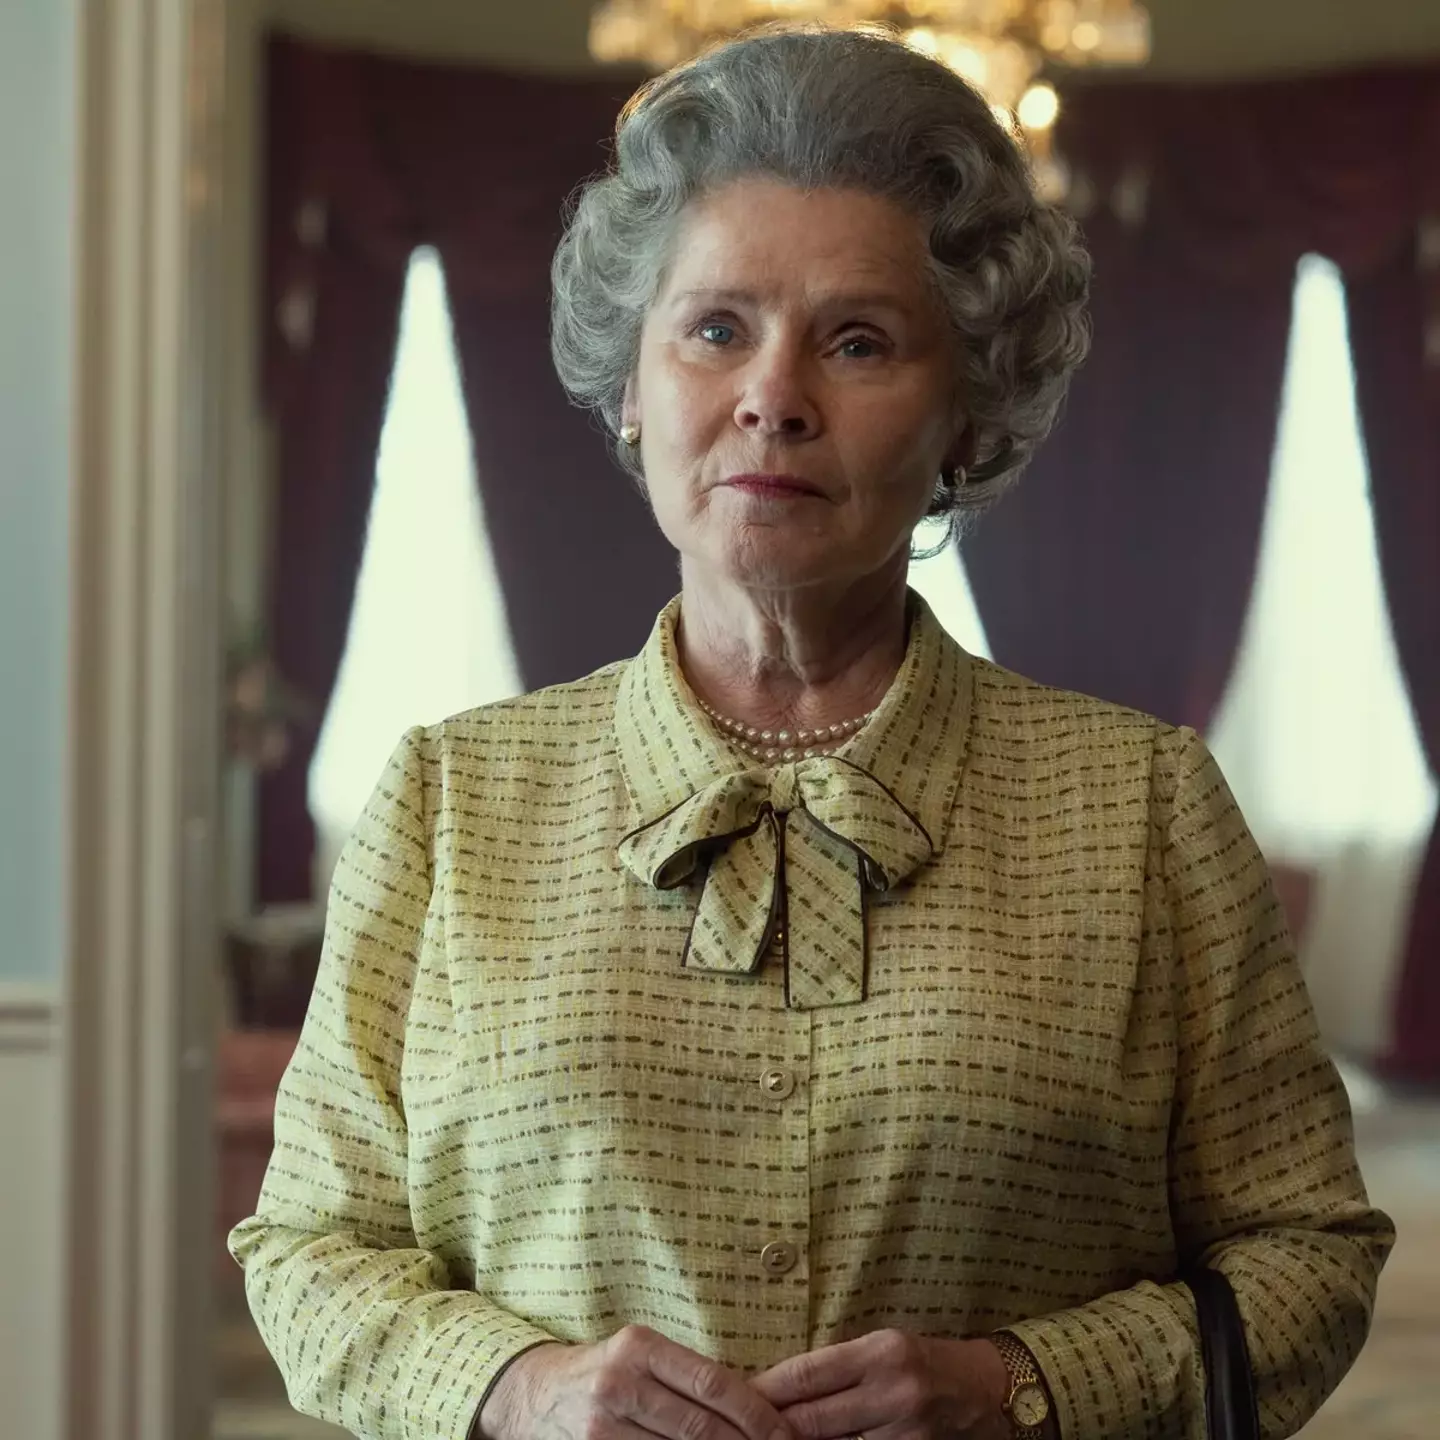 Imelda Staunton will portray the Queen in The Crown.